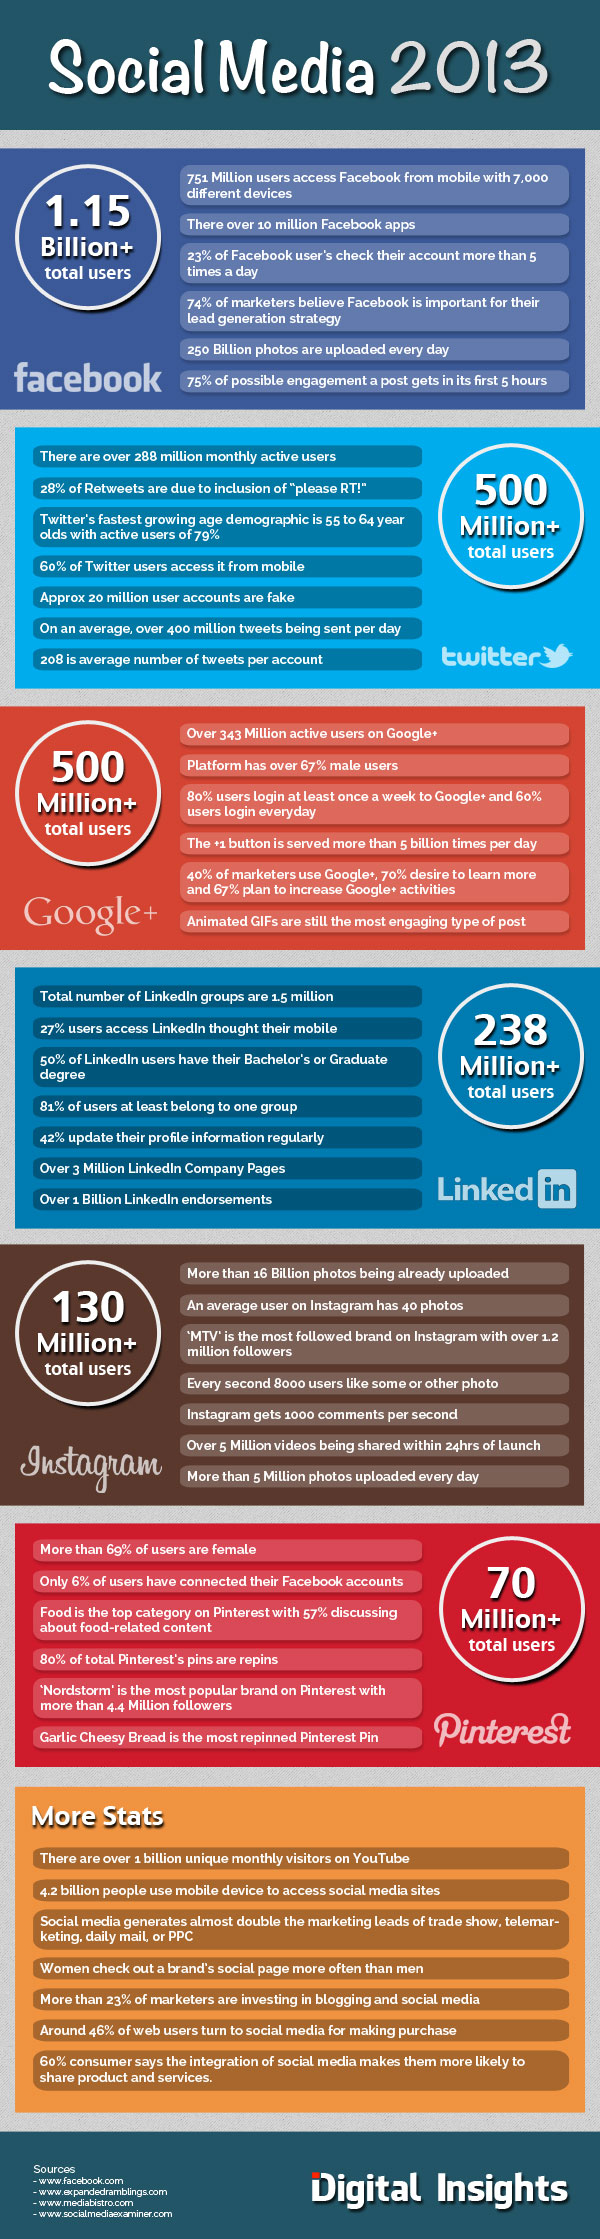 Social Media Statistics 2013 you need to know